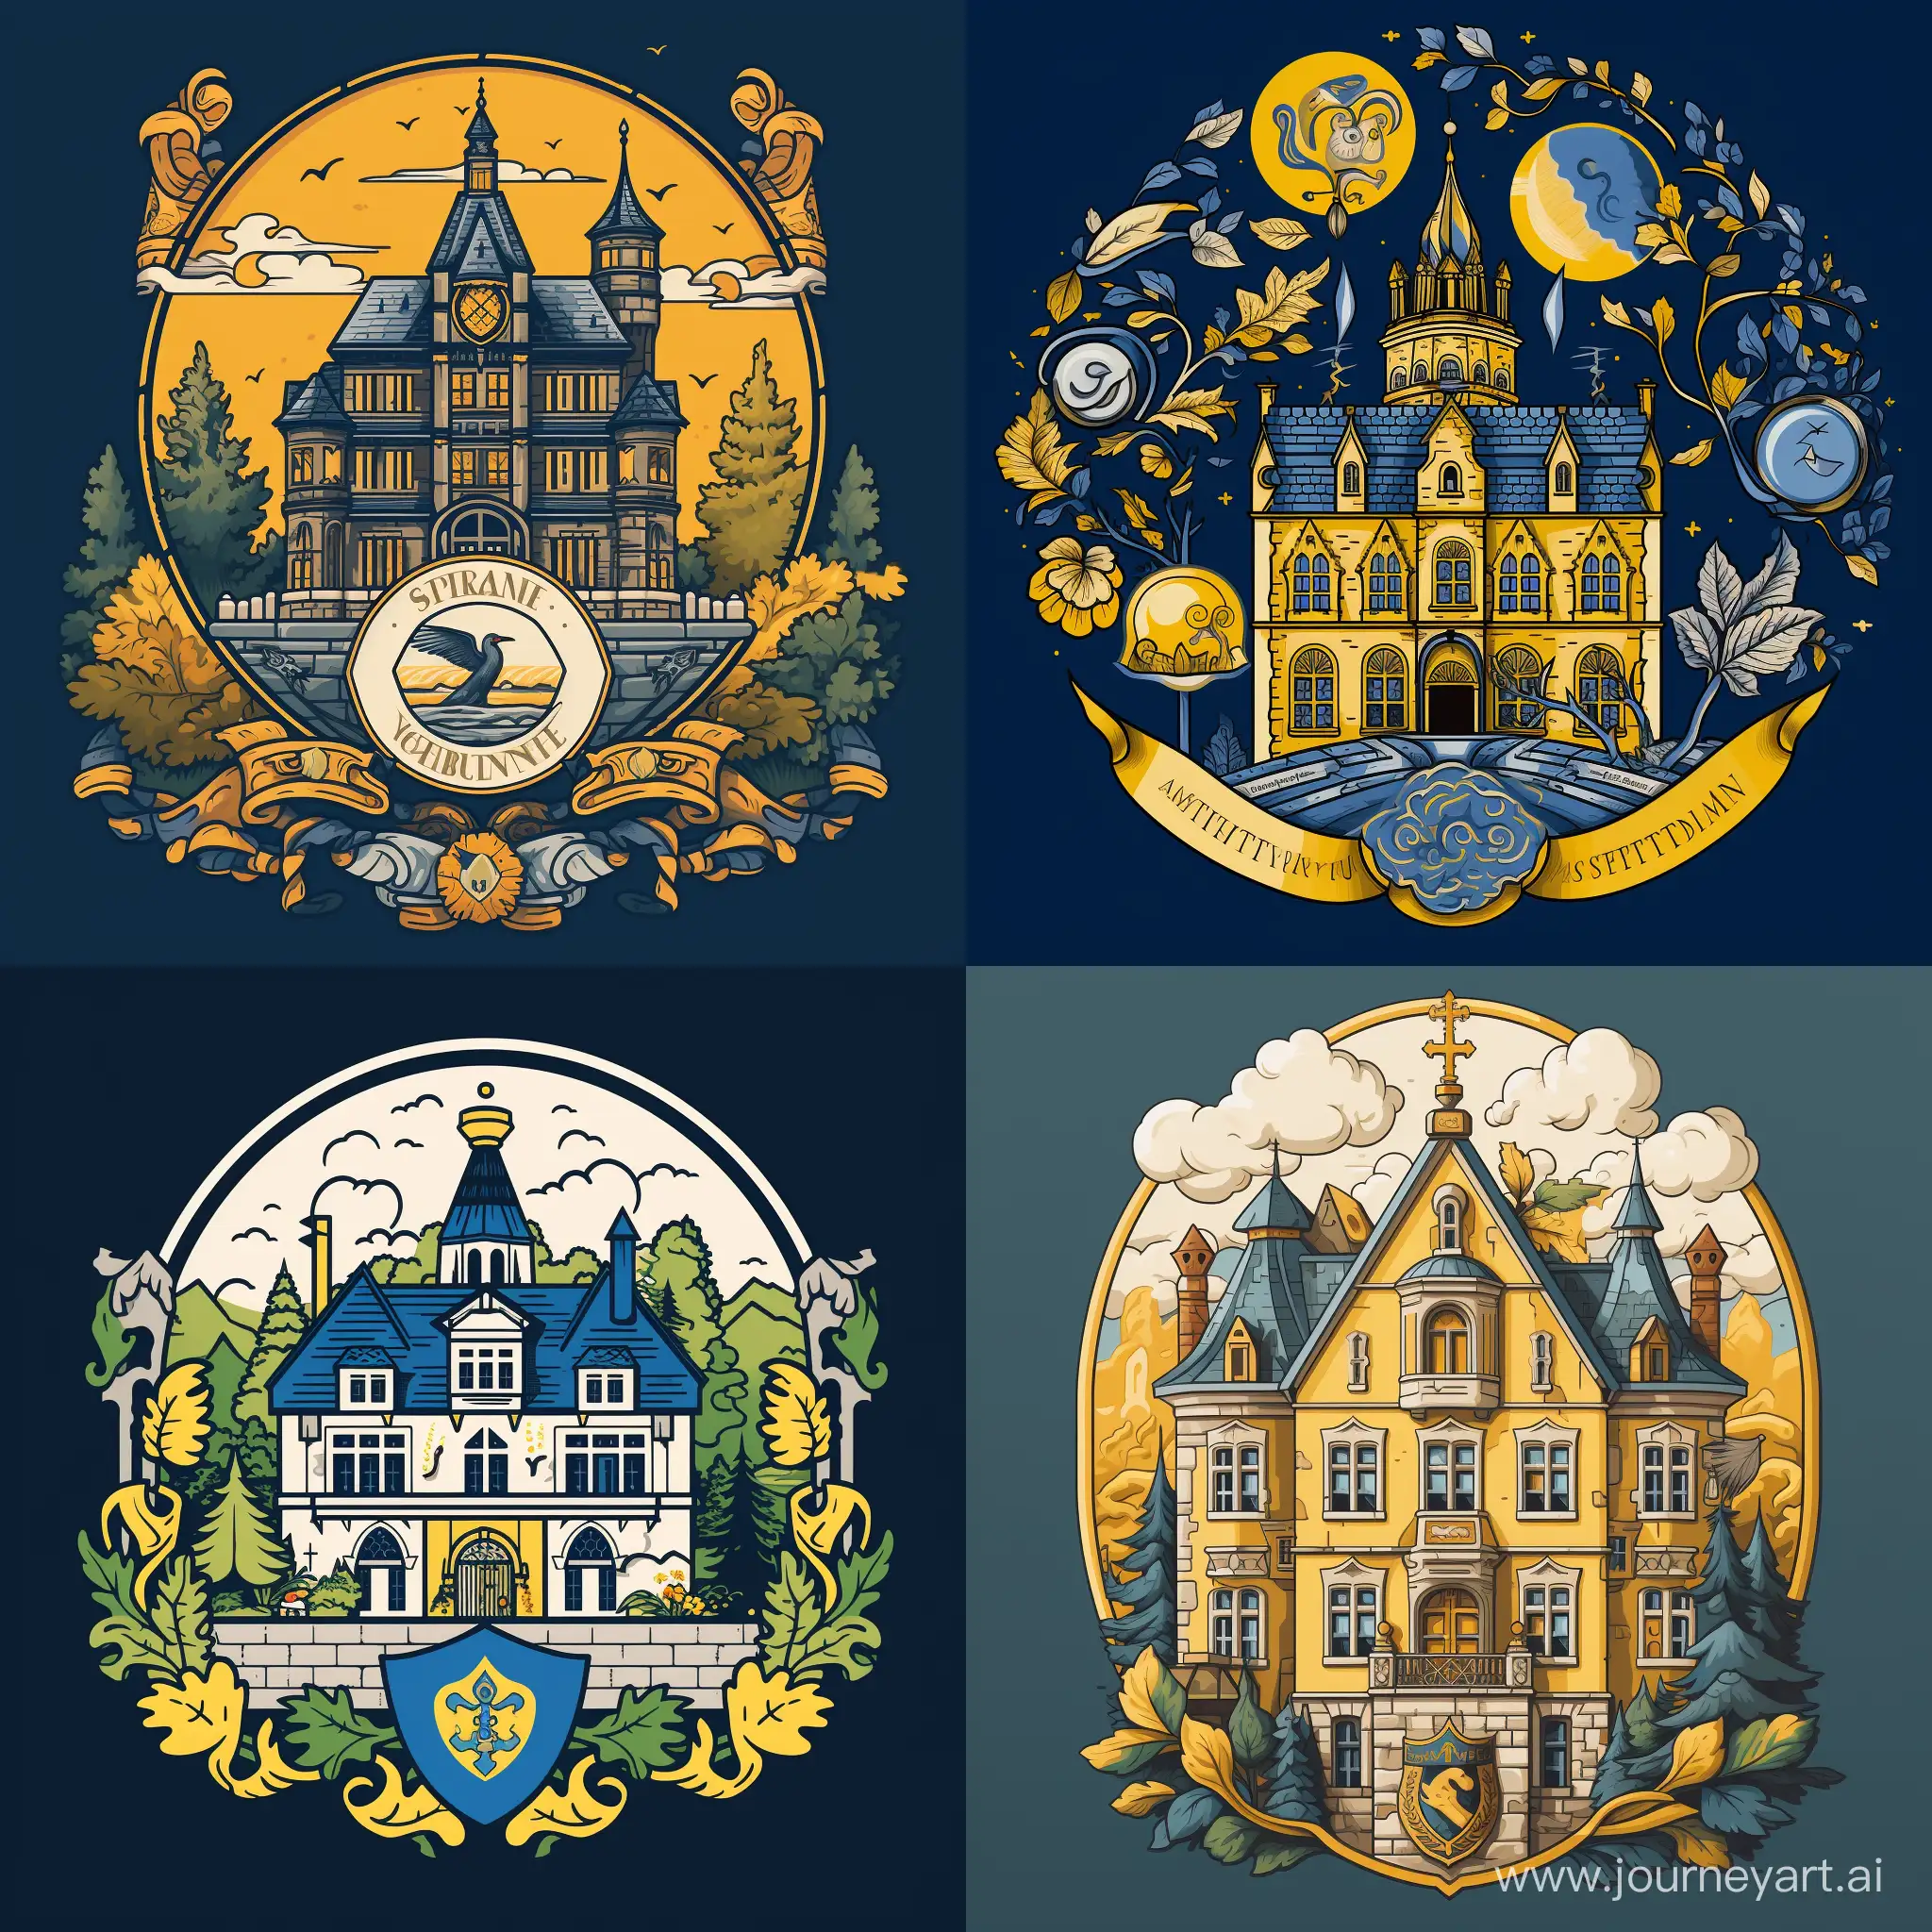 Historic-Swabian-Guest-House-with-Cegldbercels-Emblem-in-Blue-and-Yellow